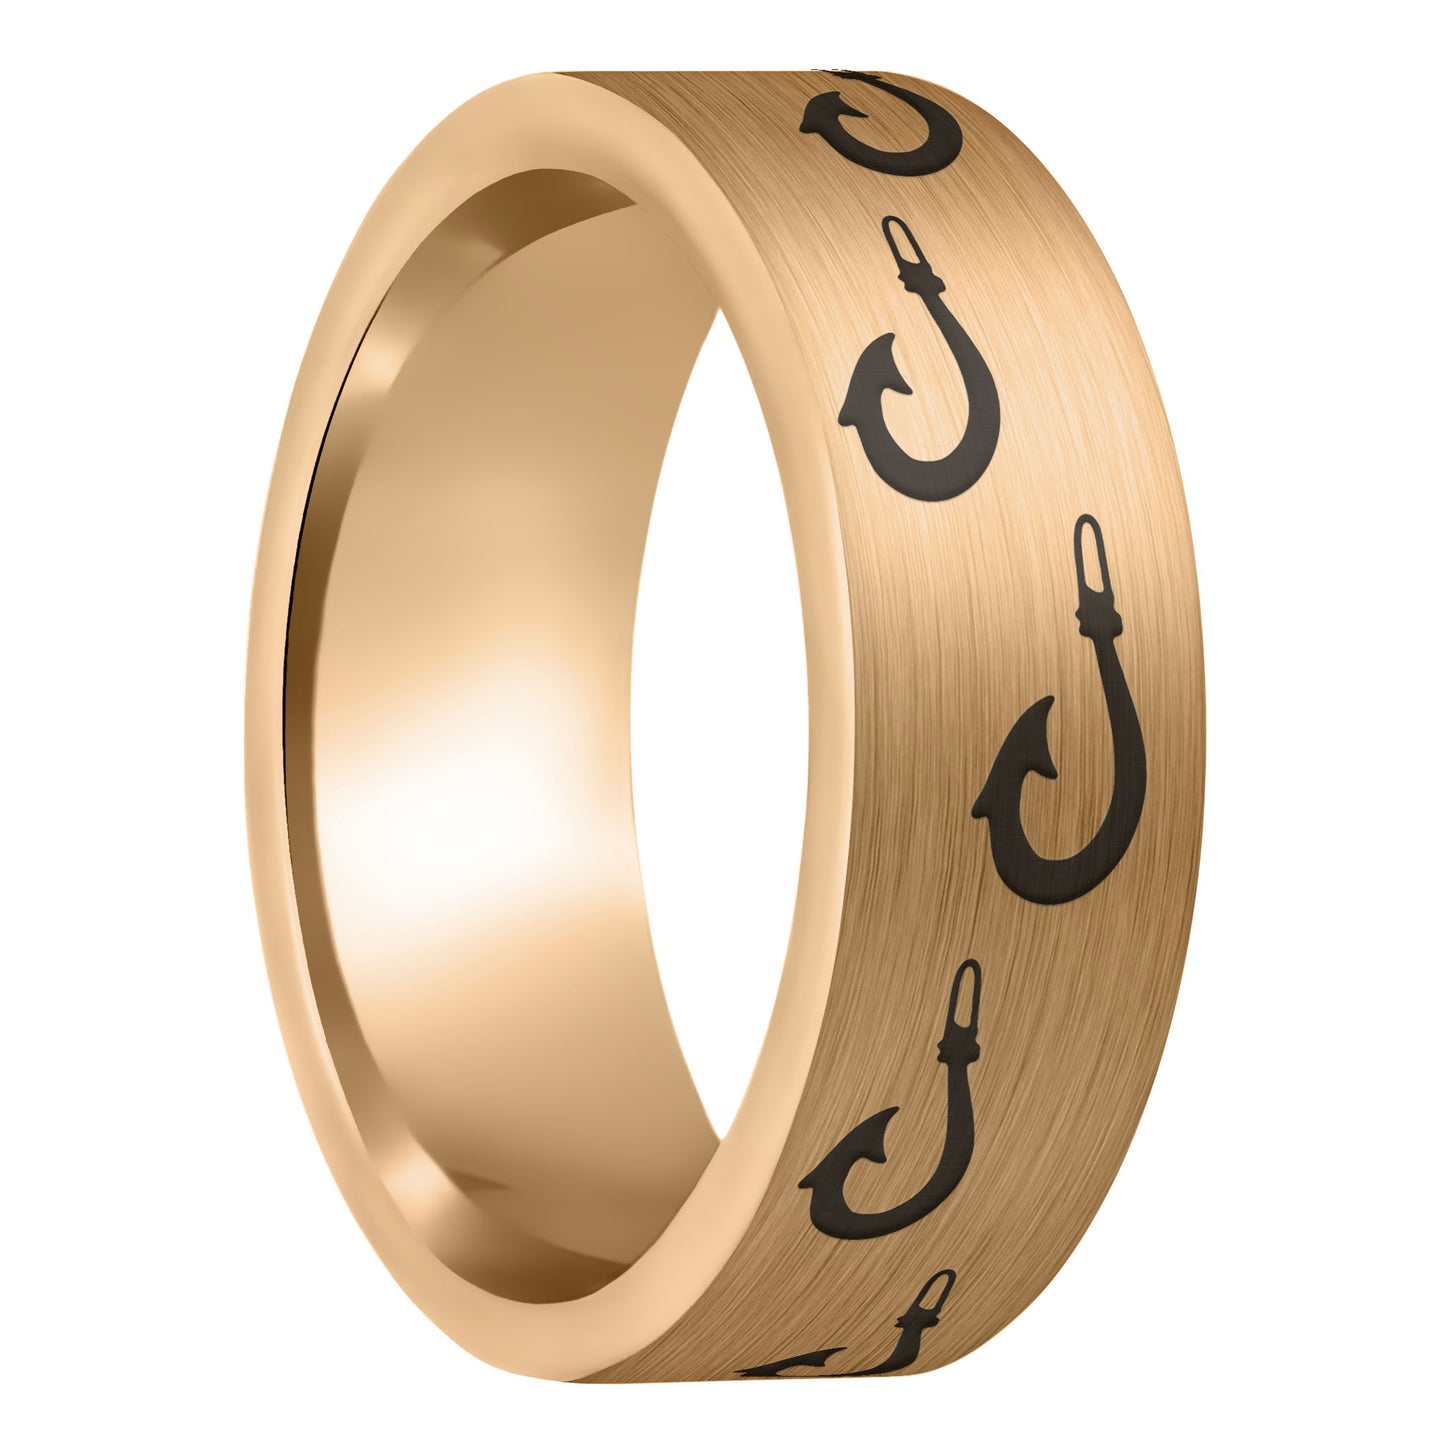 A polynesian fishing hook brushed rose gold tungsten men's wedding band displayed on a plain white background.